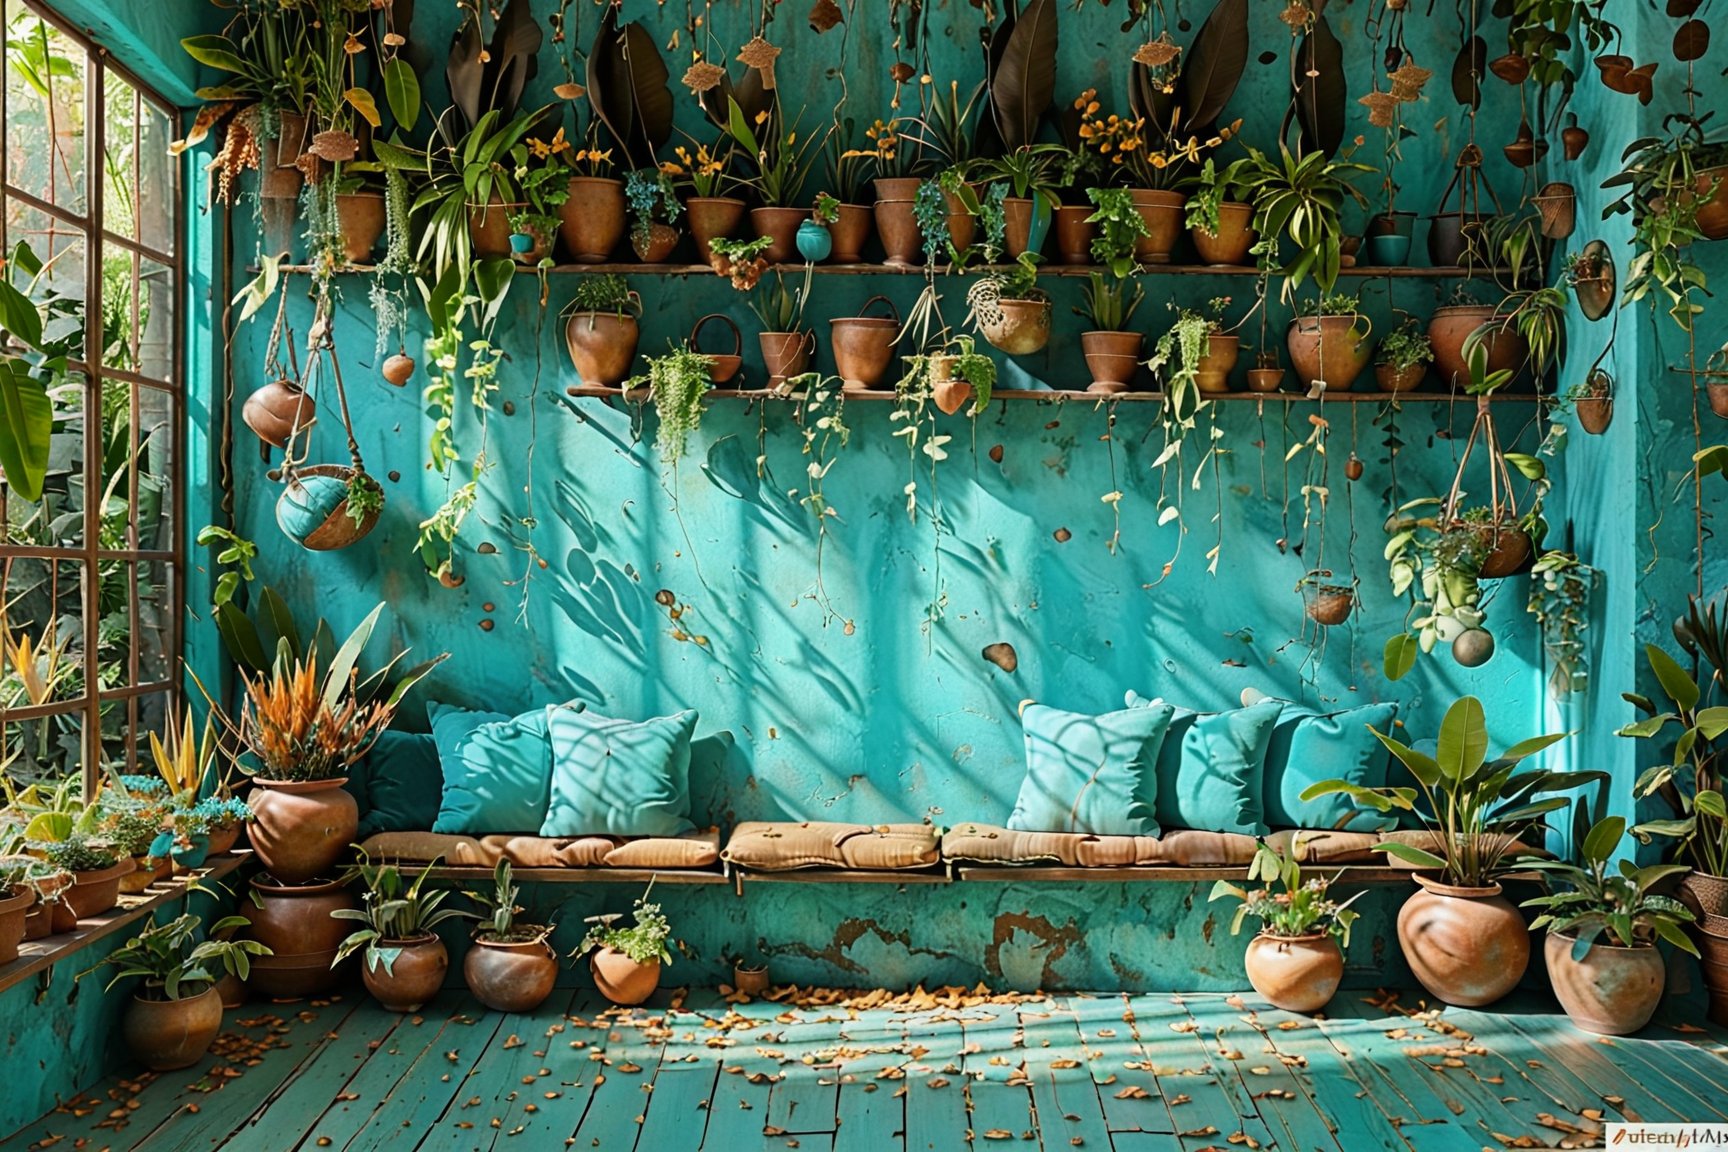 A cozy indoor space with a rustic ambiance. A turquoise wall serves as the backdrop, adorned with hanging plants and pots. A wooden bench with cushions is placed against the wall, surrounded by various potted plants. The floor is wooden and scattered with fallen leaves, adding to the autumnal feel. A large window on the left lets in natural light, illuminating the space and casting shadows. The room exudes warmth, comfort, and a connection to nature.